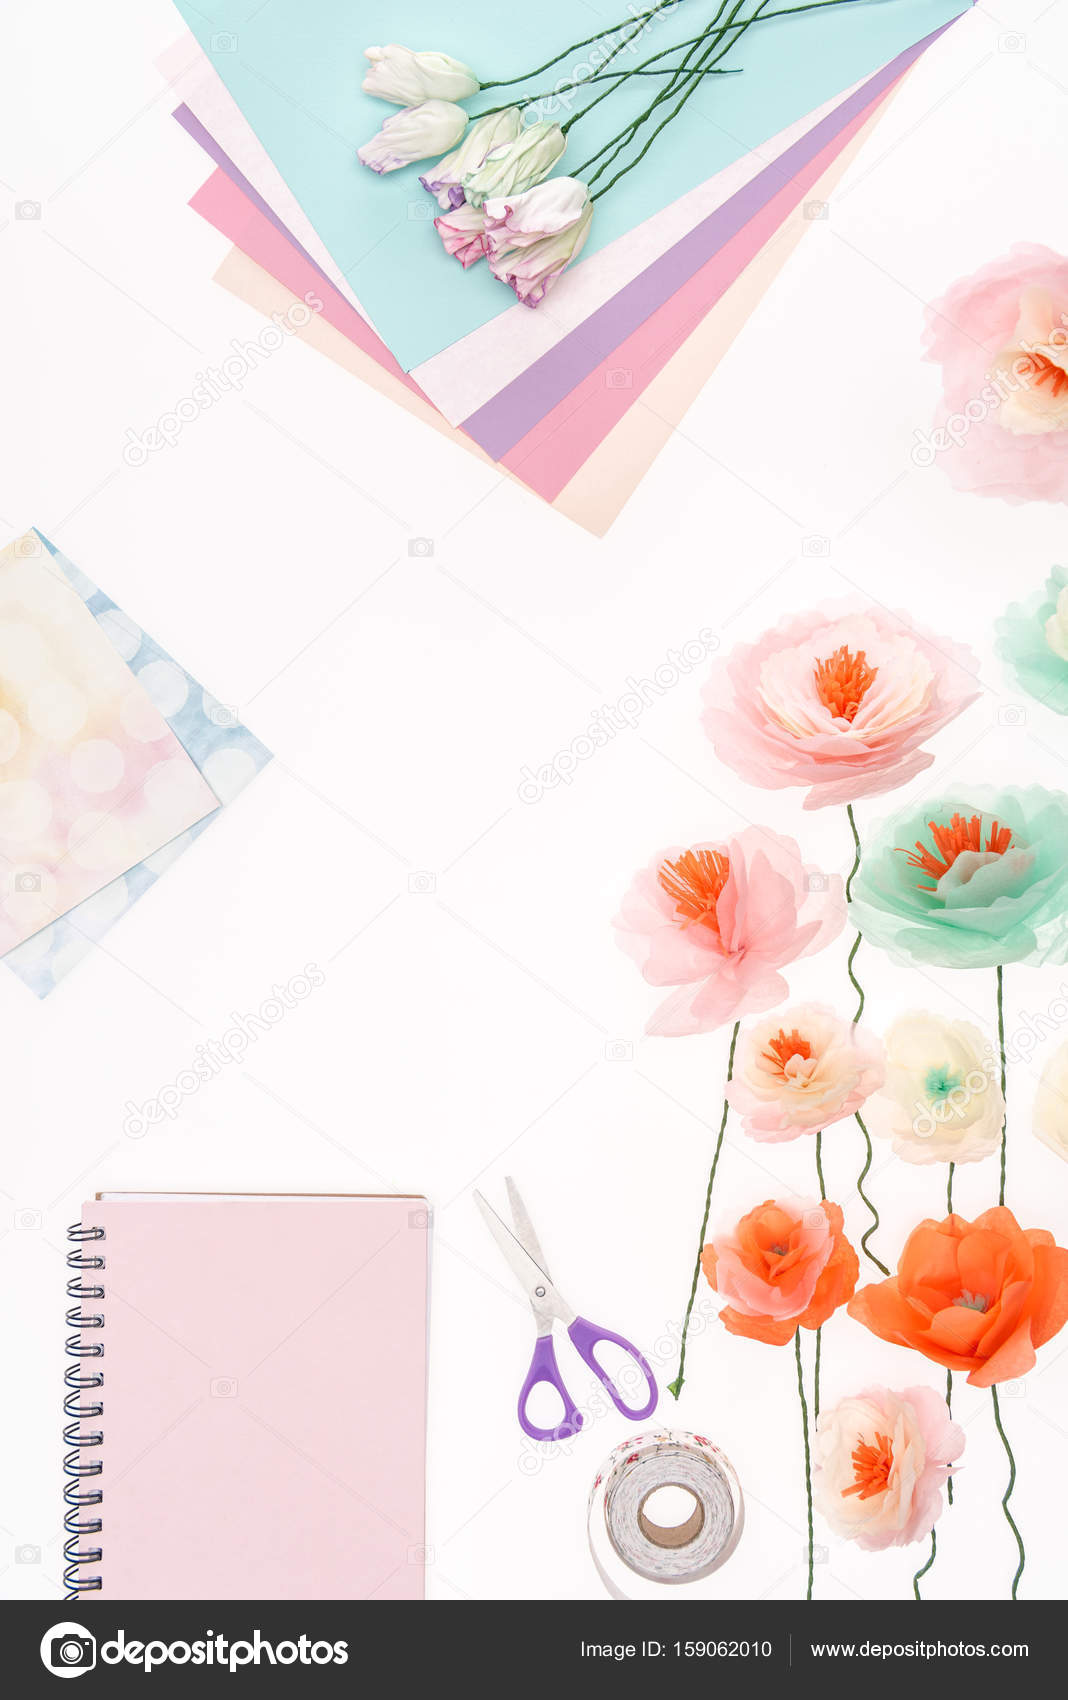 Decorative flowers and stationery items — Stock Photo © DimaBaranow ...